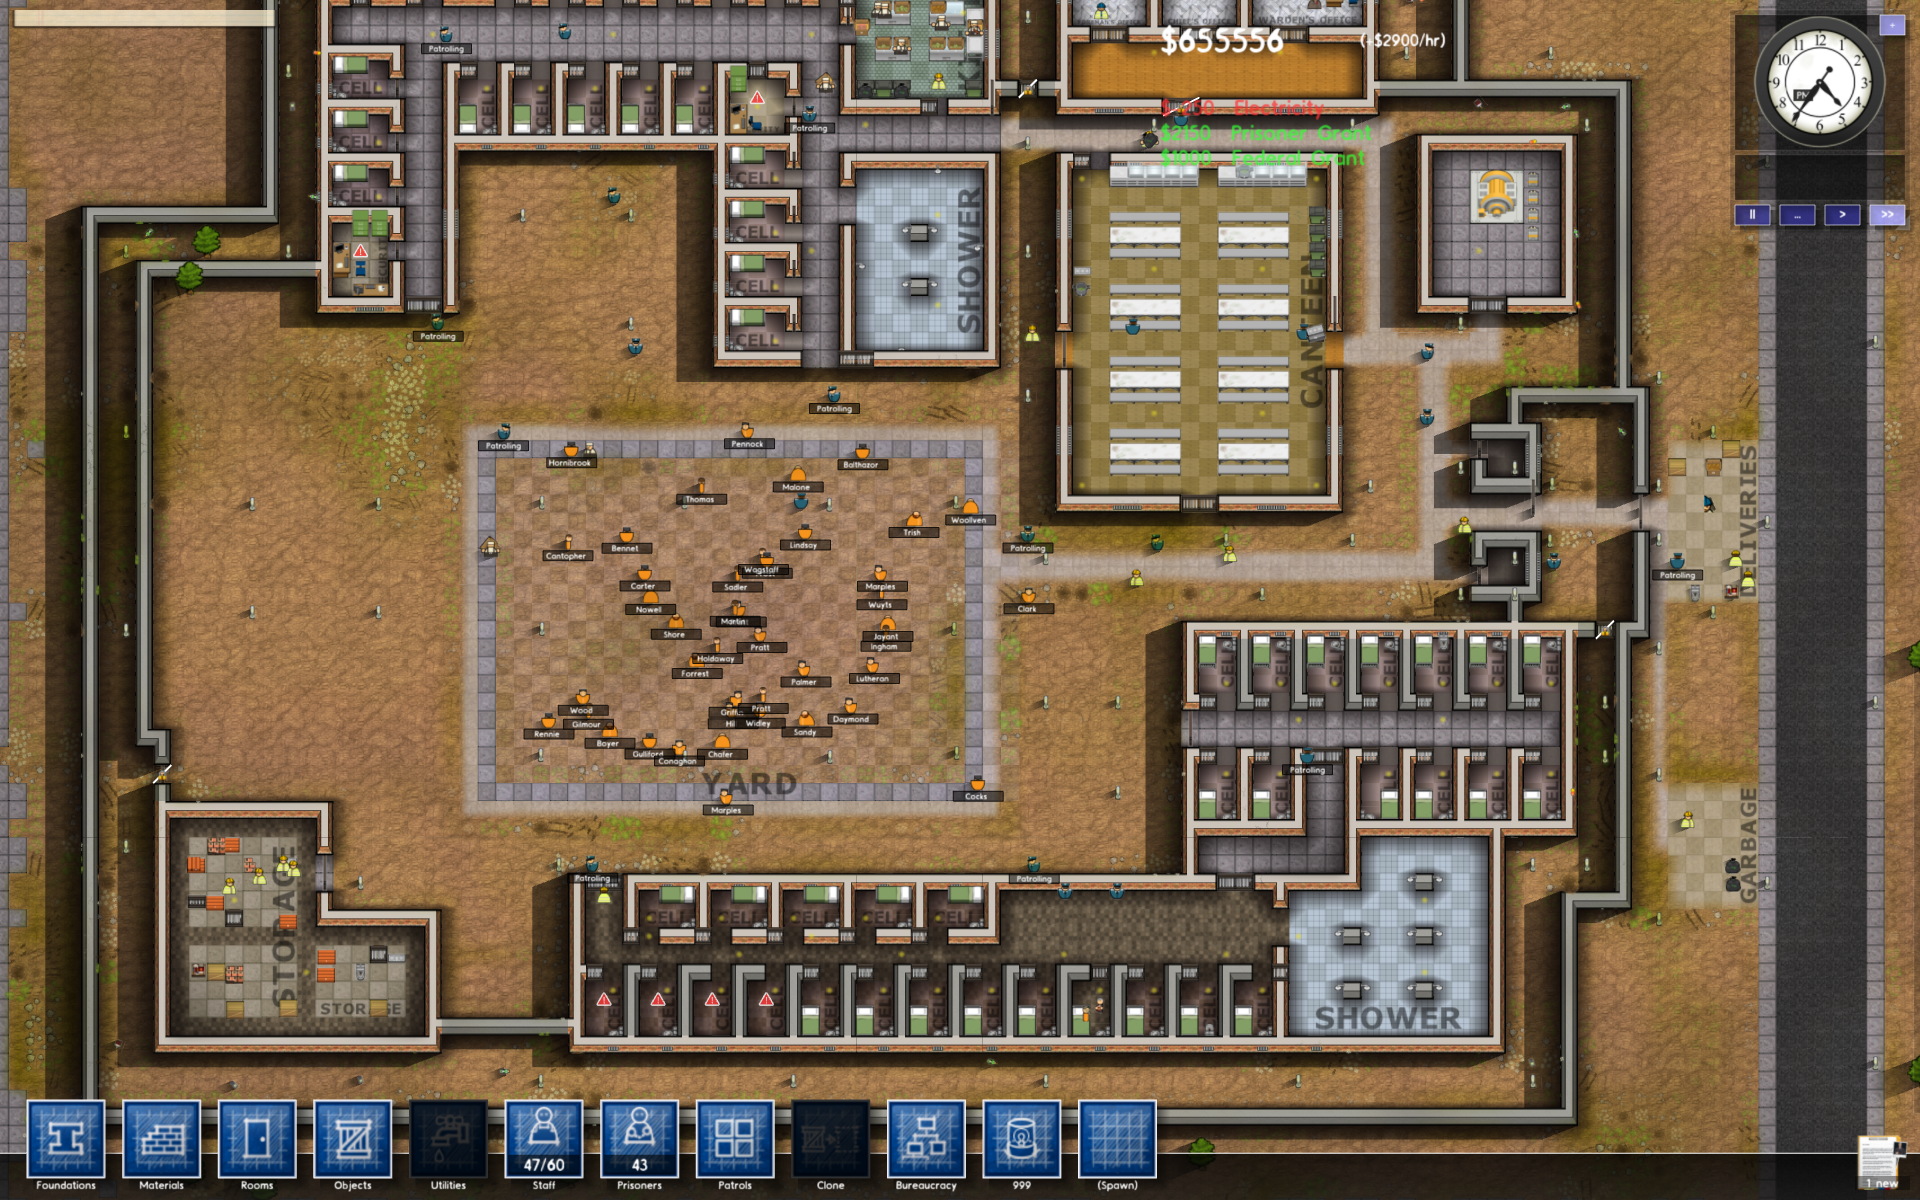 http://www.introversion.co.uk/prisonarchitect/images/ss3.png